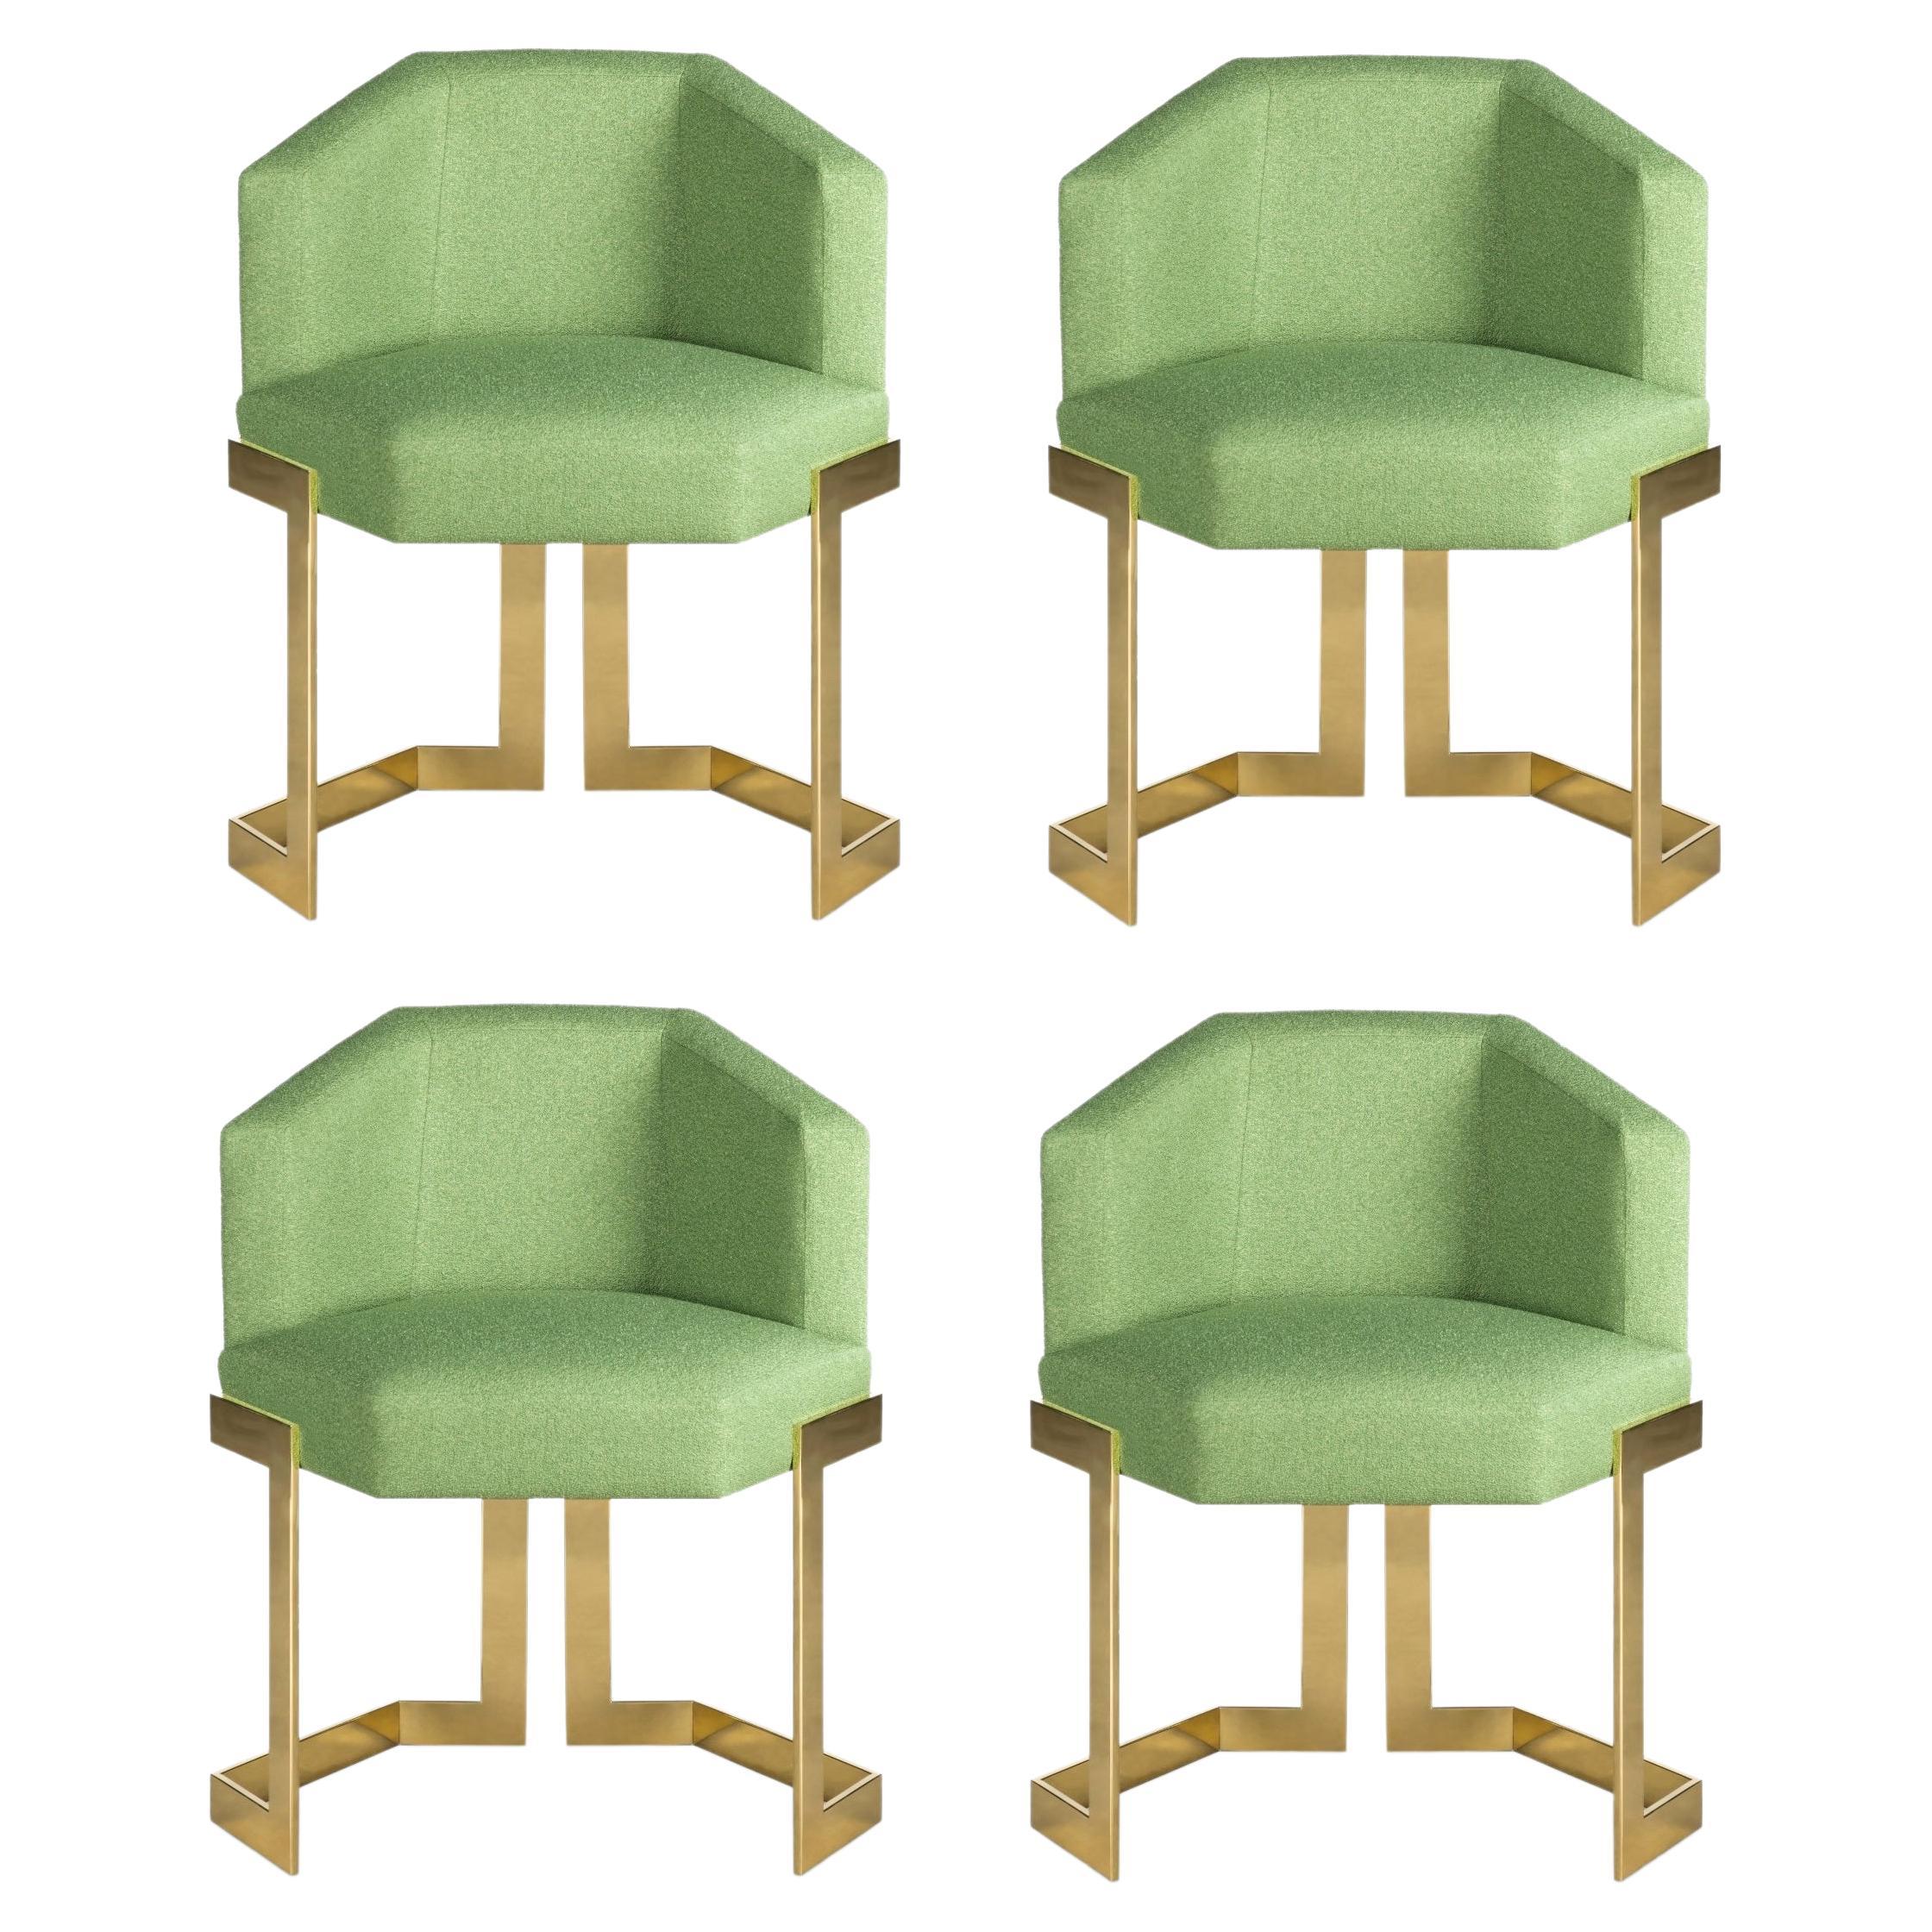 Set of 4 the Hive Dining Chairs, Royal Stranger